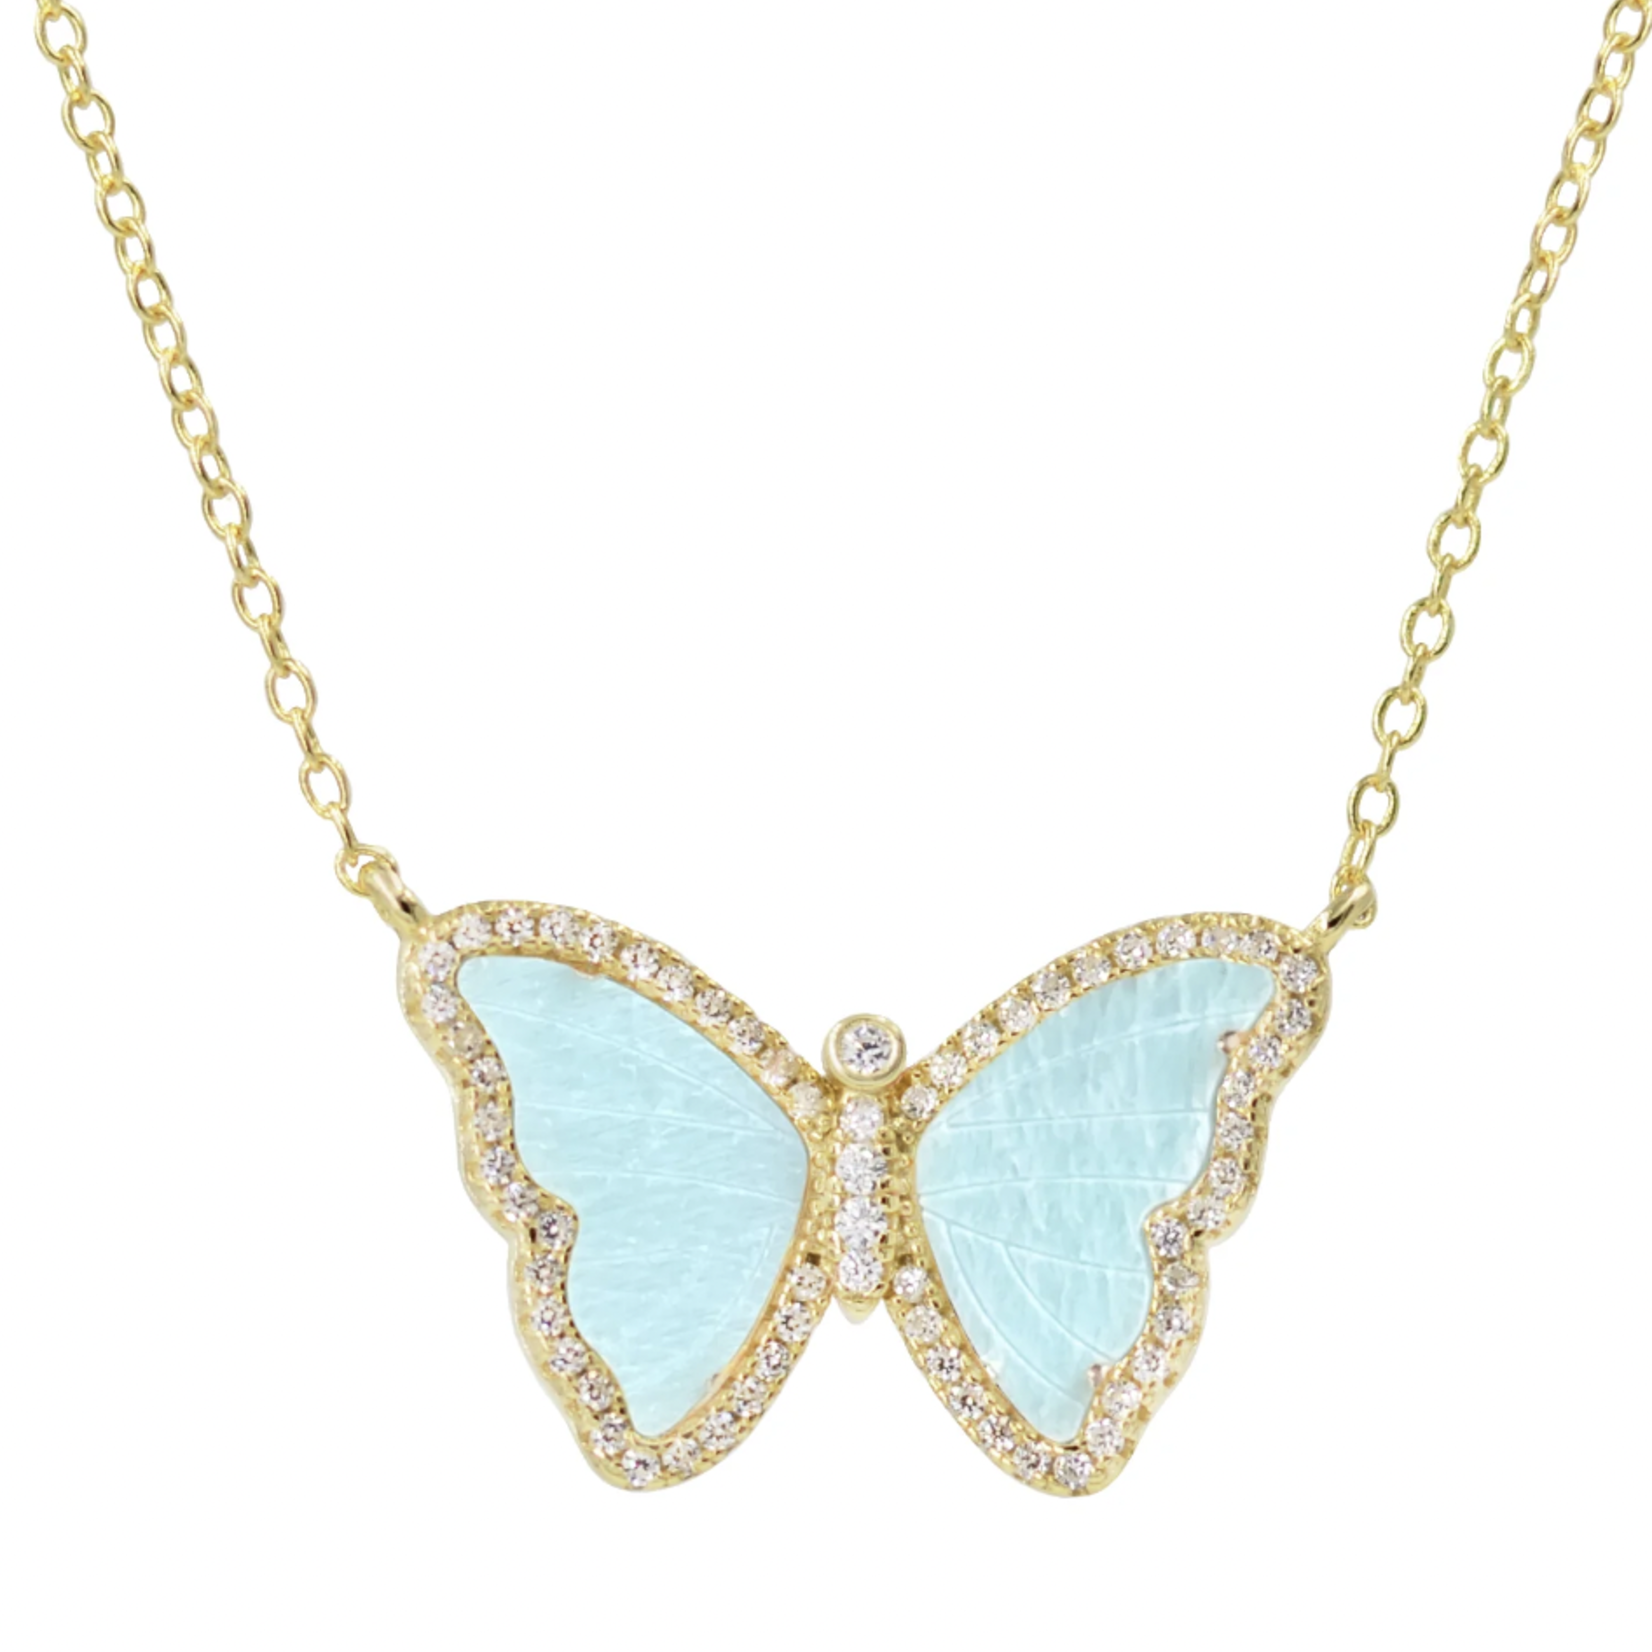 Amazonite Butterfly Necklace with Crystals - Gold